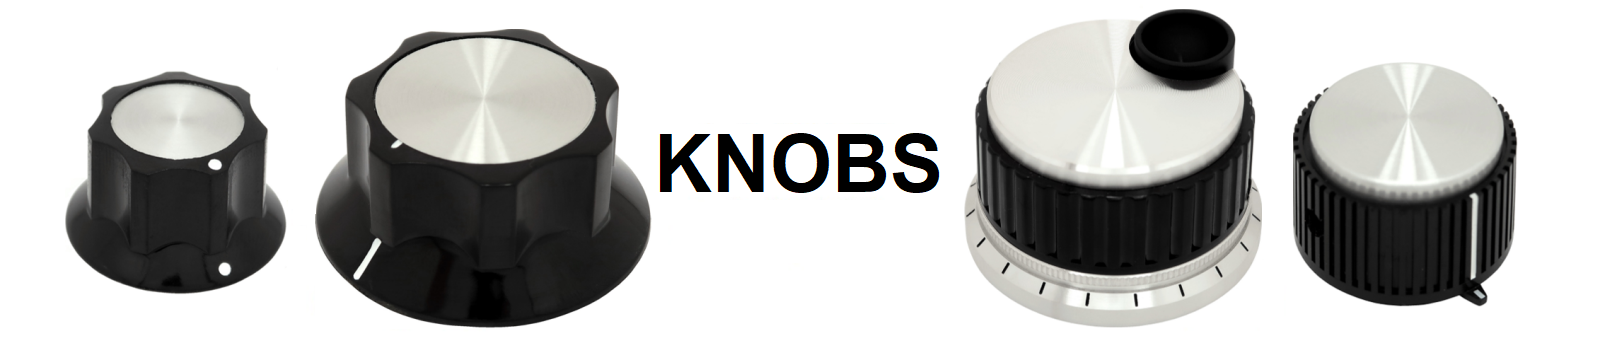 Knobs Banner - Max-Gain Systems, Inc.